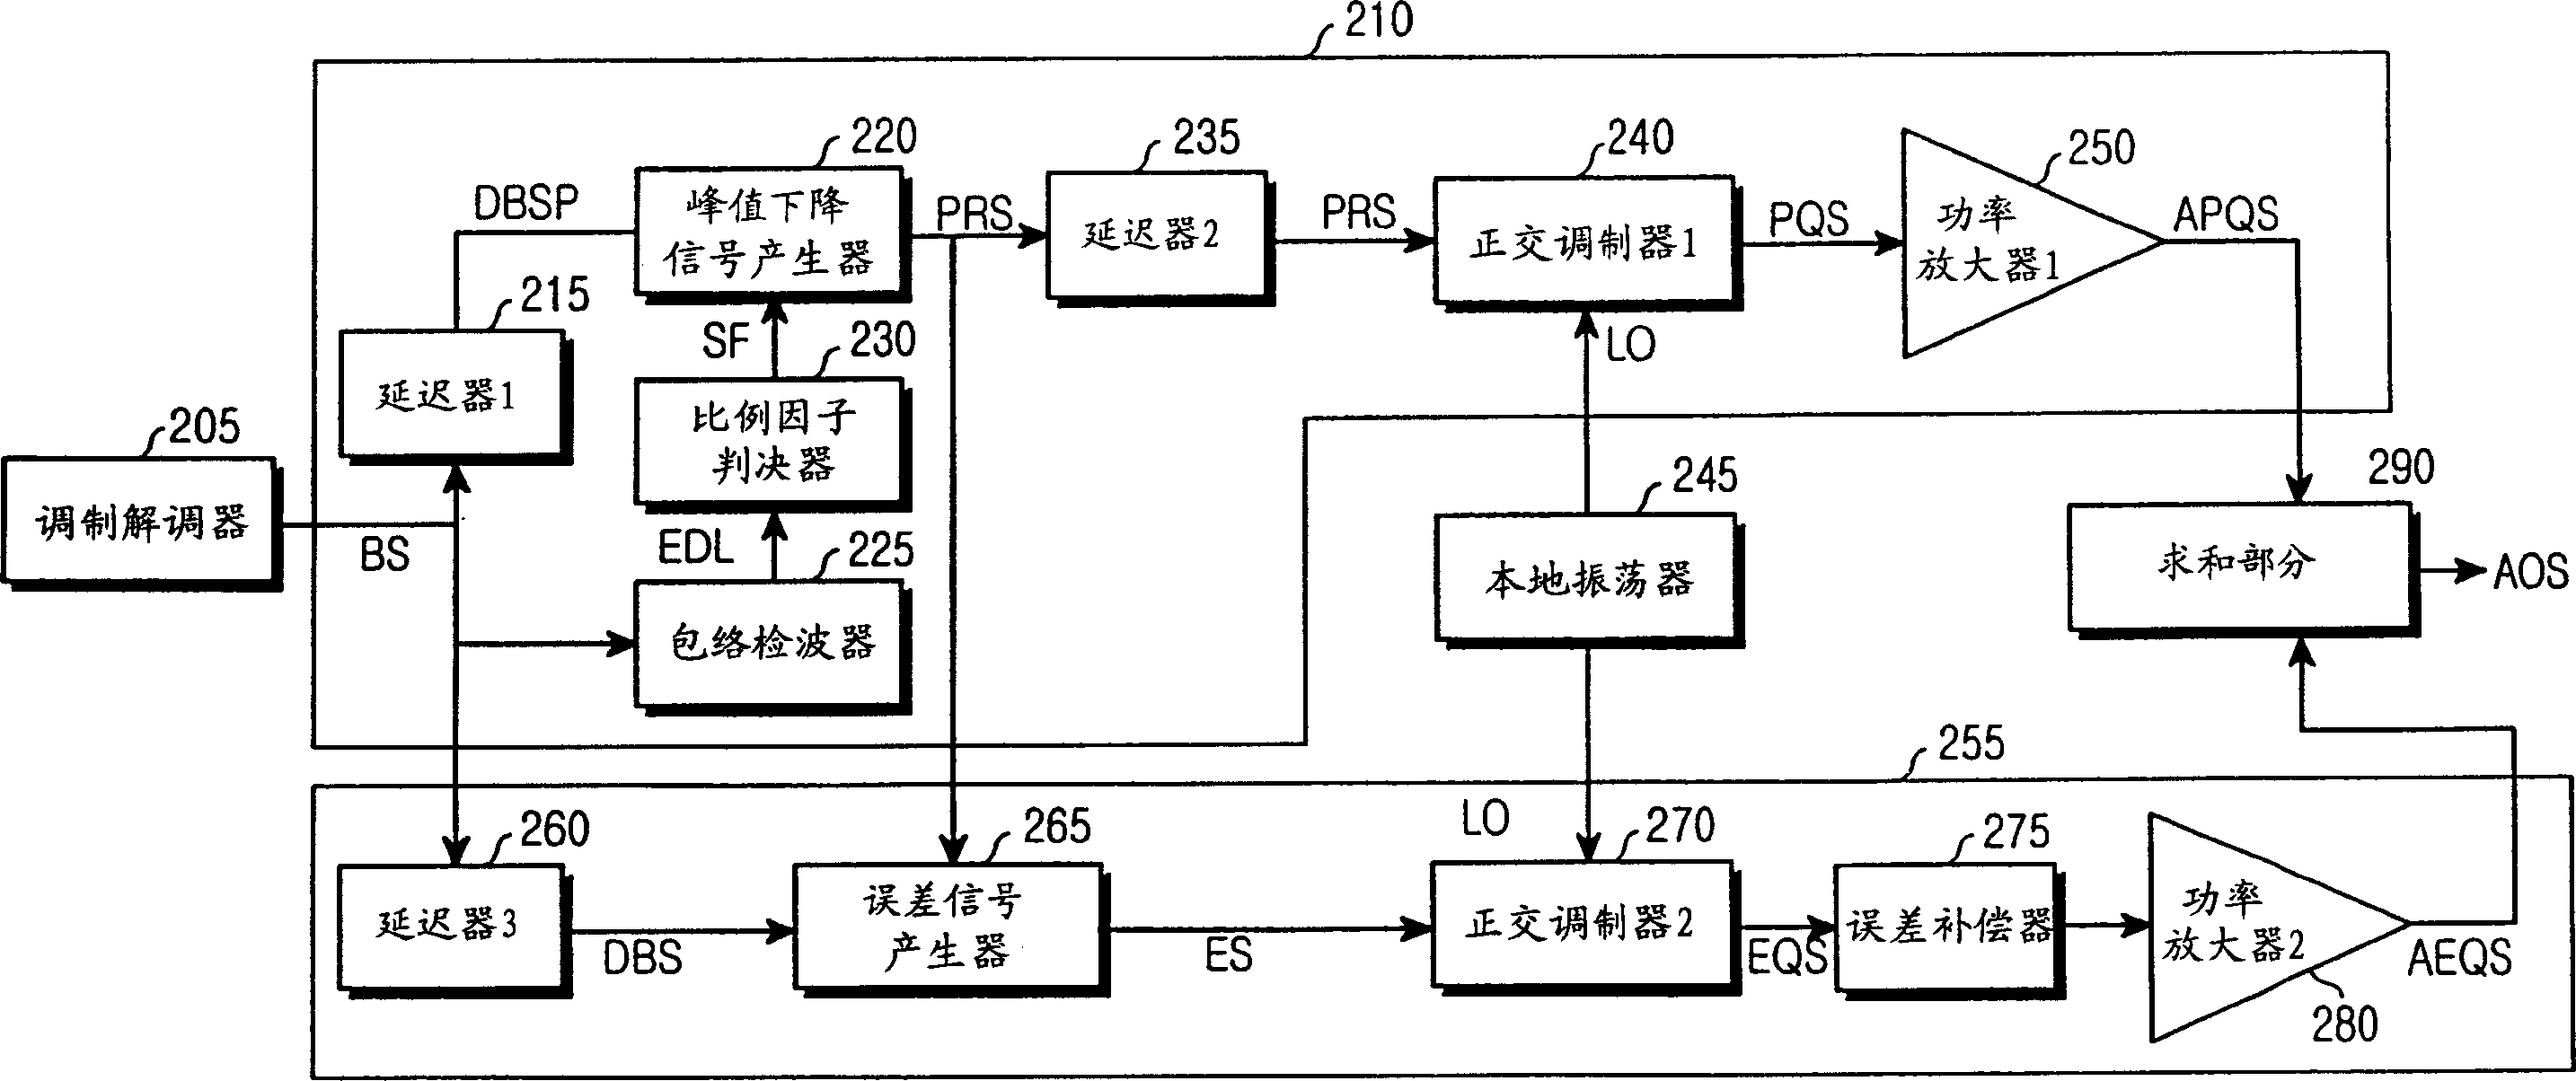 Apparatus and method for improving efficiency of power amplifier operating under large peak-to average power ratio